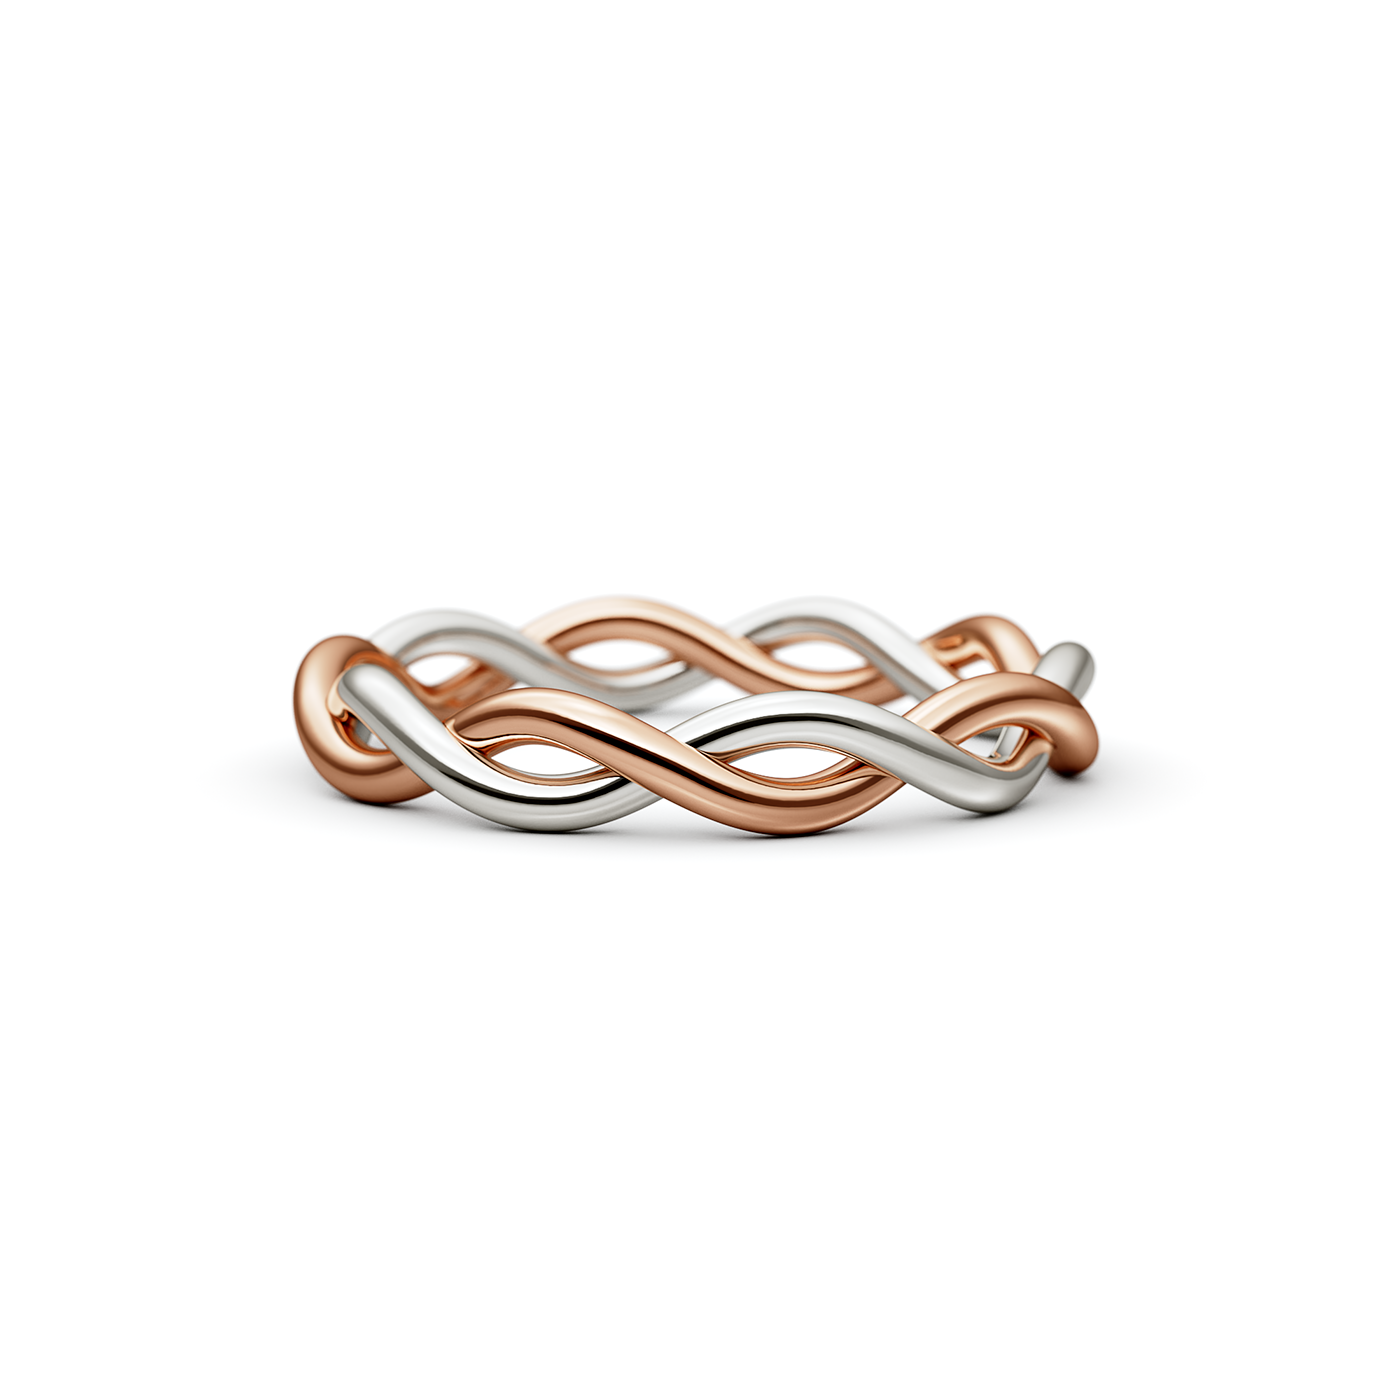 Twist Band Ring in 14k White-Rose Gold